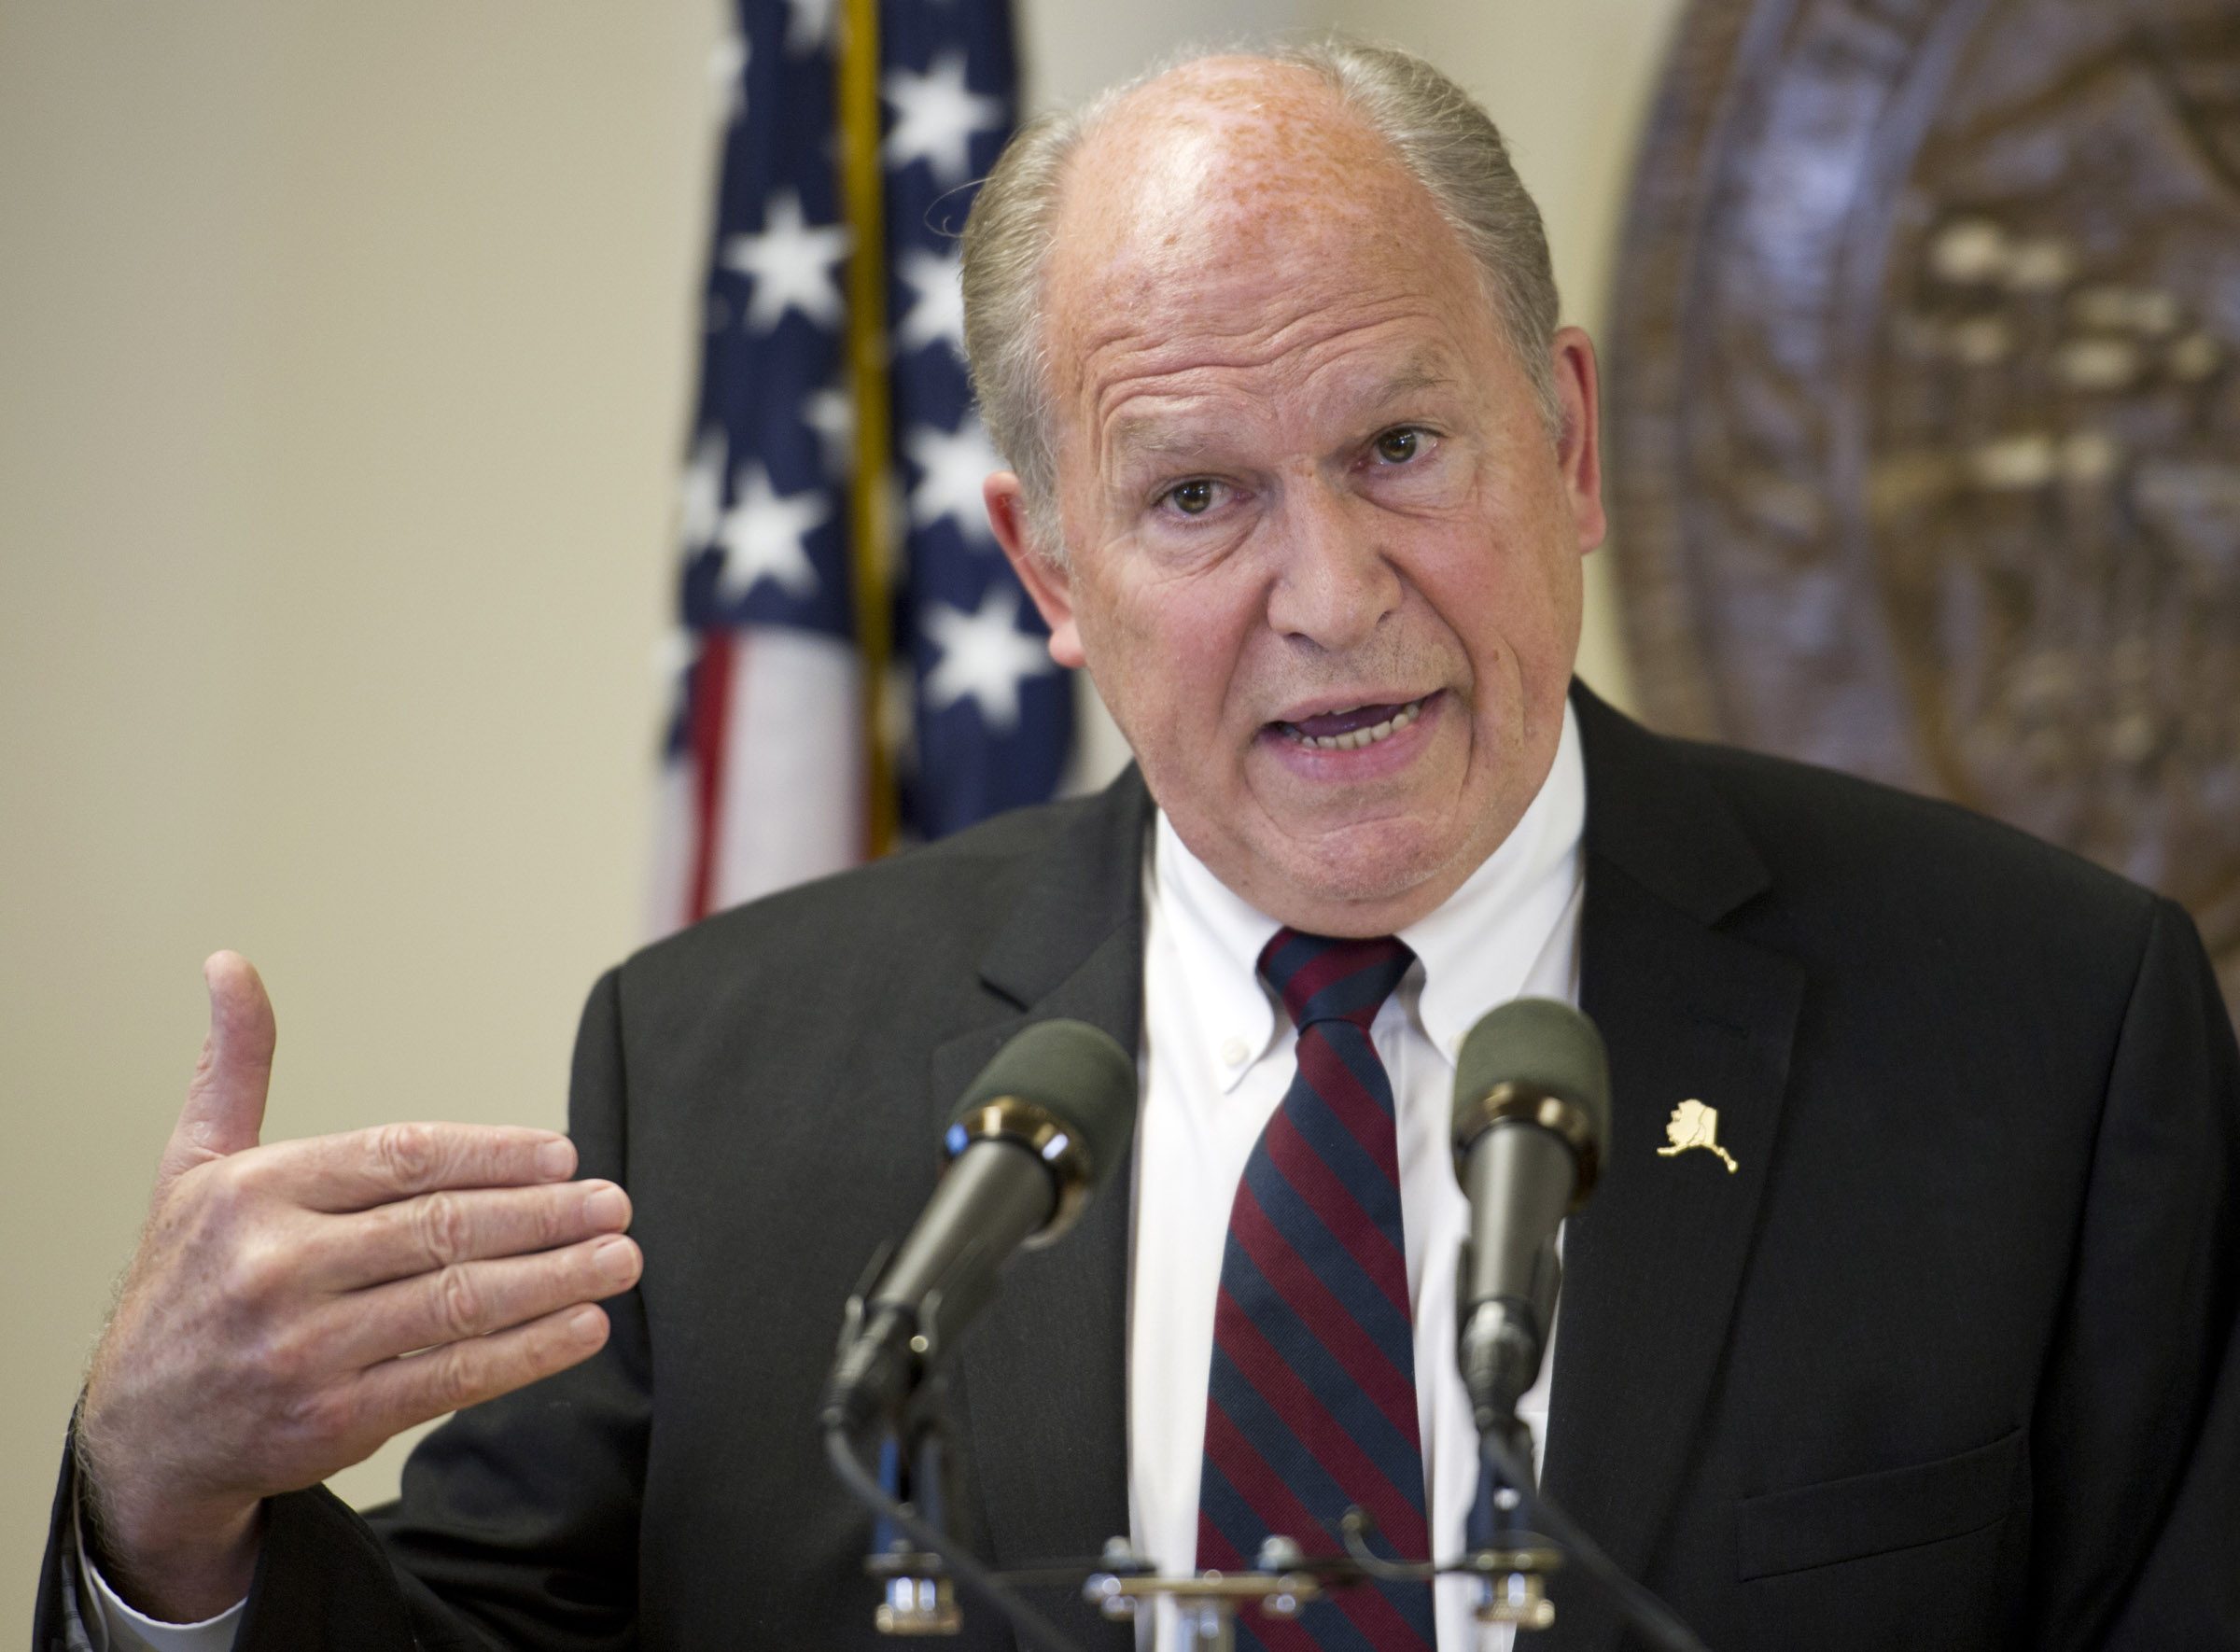 Gov. Bill Walker speaks during a press conference in Juneau on Wednesday, June 15, 2016. Gov. Walker congratulated the Senate on passing SB 128, the Permanent Fund spending bill, and asked the House to do the same. (Michael Penn / Juneau Empire)